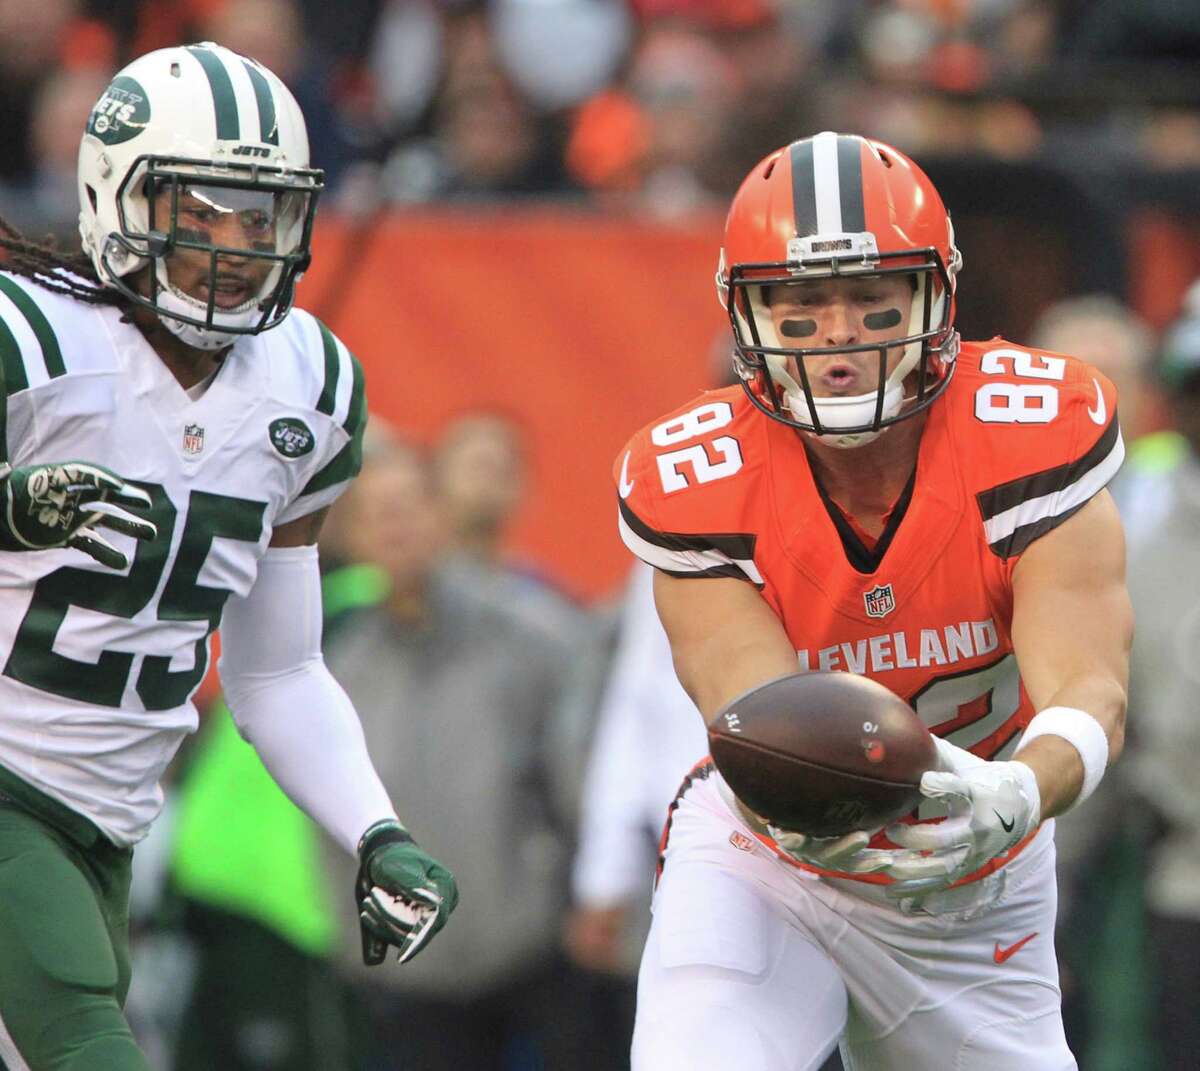 Cleveland Browns tight end Gary Barnidge makes a catch in front of New York Jets' Calvin Pryor during the first quarter on Sunday, Oct. 30, 2016 at FirstEnergy Stadium in Cleveland, Ohio. The Browns lost the game 31-28.